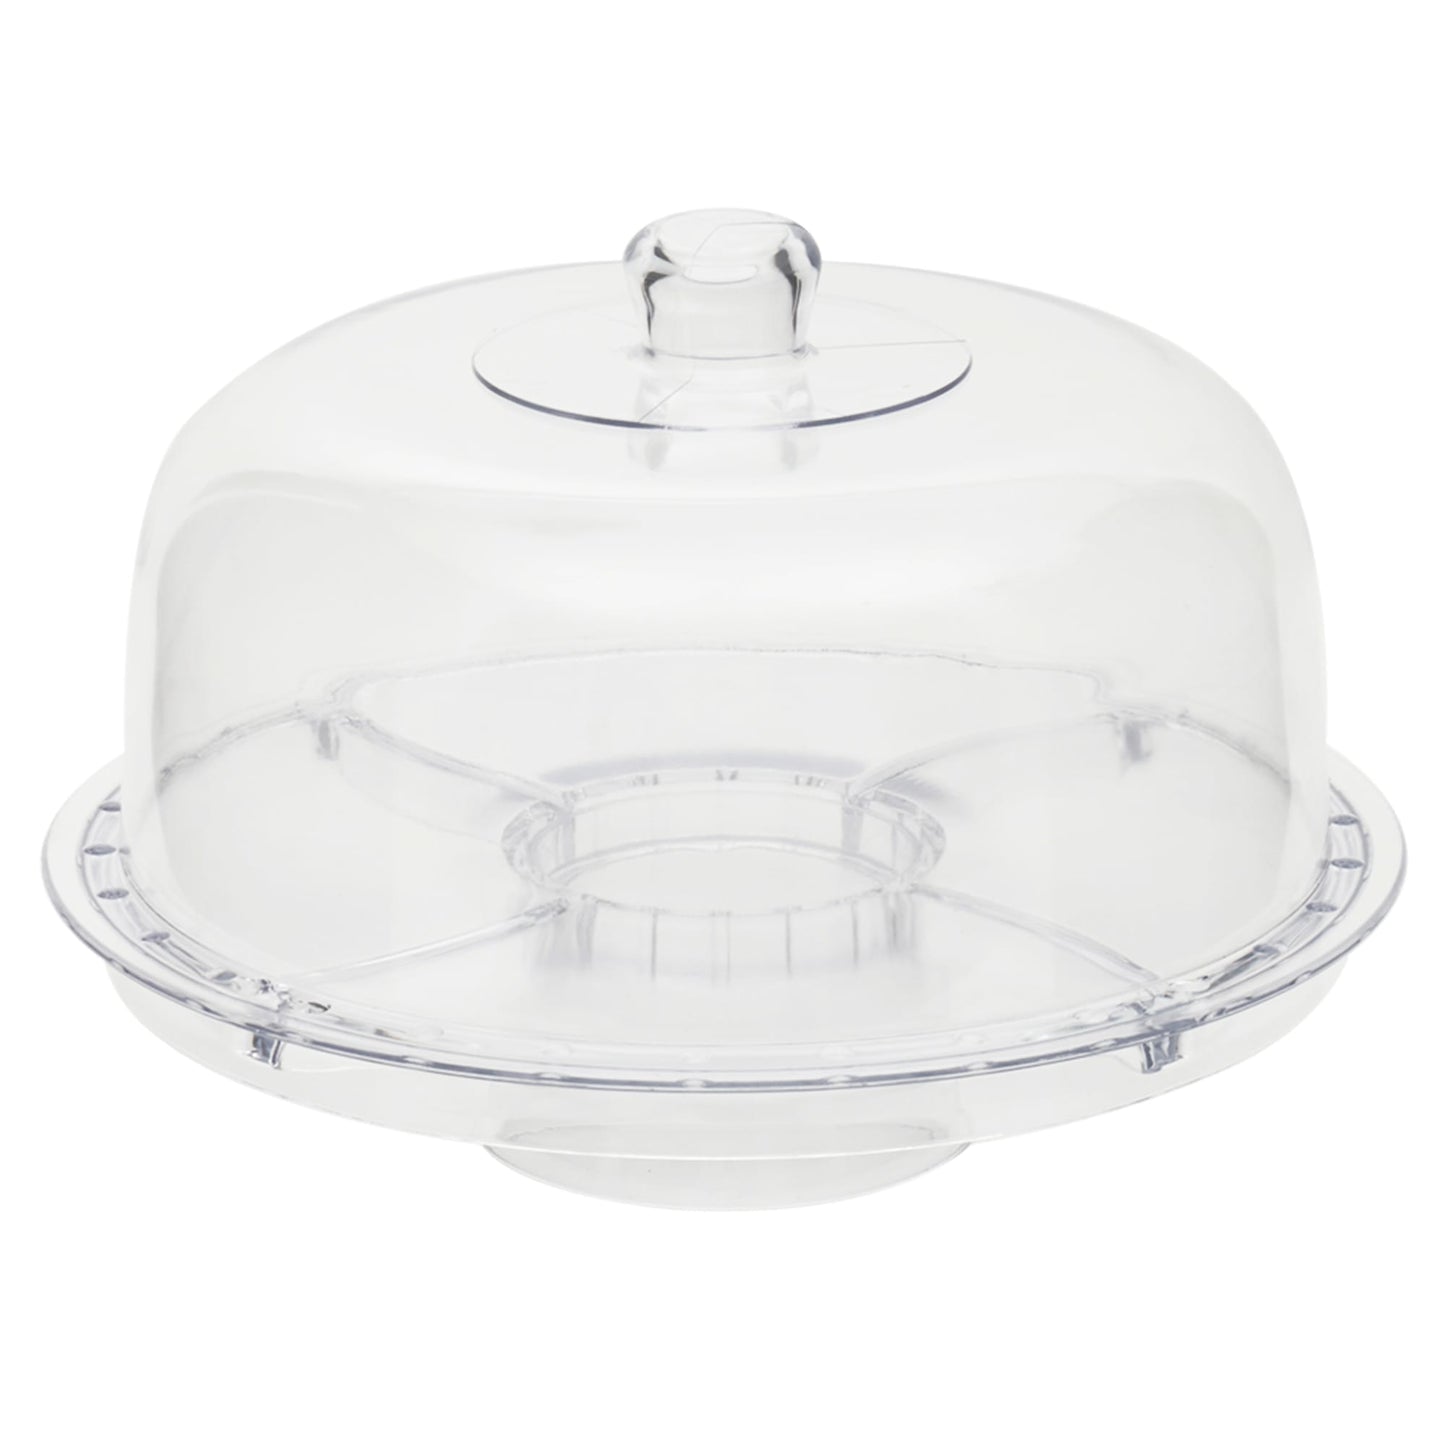 Multi-Function Cake Plate, Clear